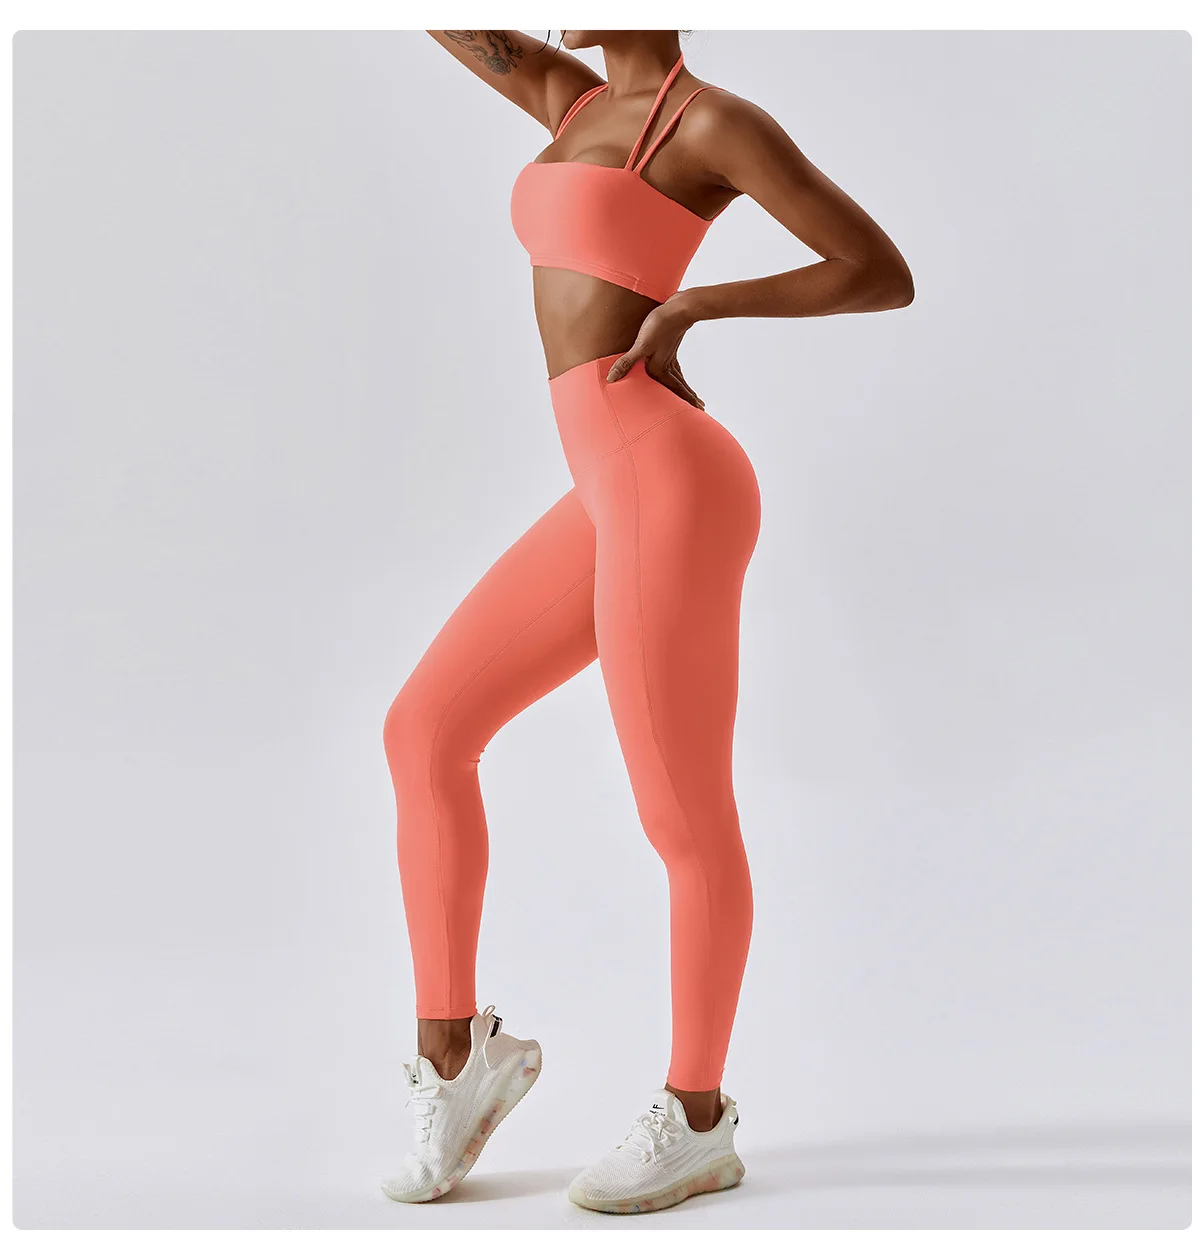 Yoga Clothing Sets Athletic Wear Women High Waist Leggings And Top Two Piece Set Seamless Gym Tracksuit Fitness Workout Outfits -S0a2b940b9a2b4fac9457c94725f8f7eeb